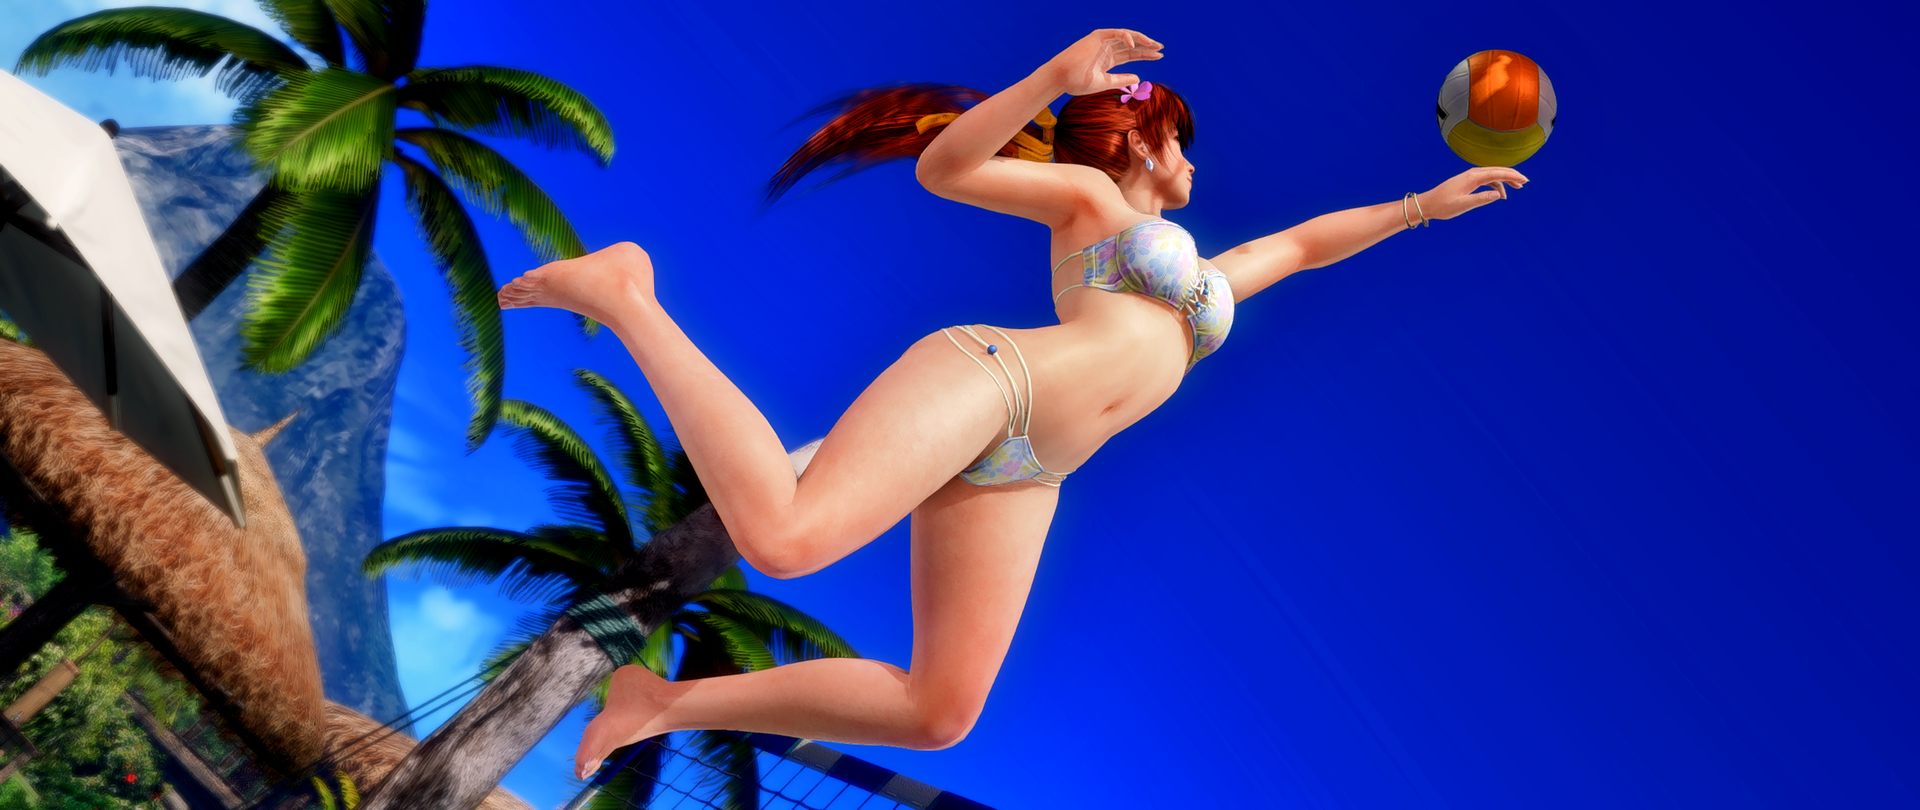 DEAD OR ALIVE Xtreme Venus Vacation Screenshot 2020.01.16 - 19.08.27.86.png